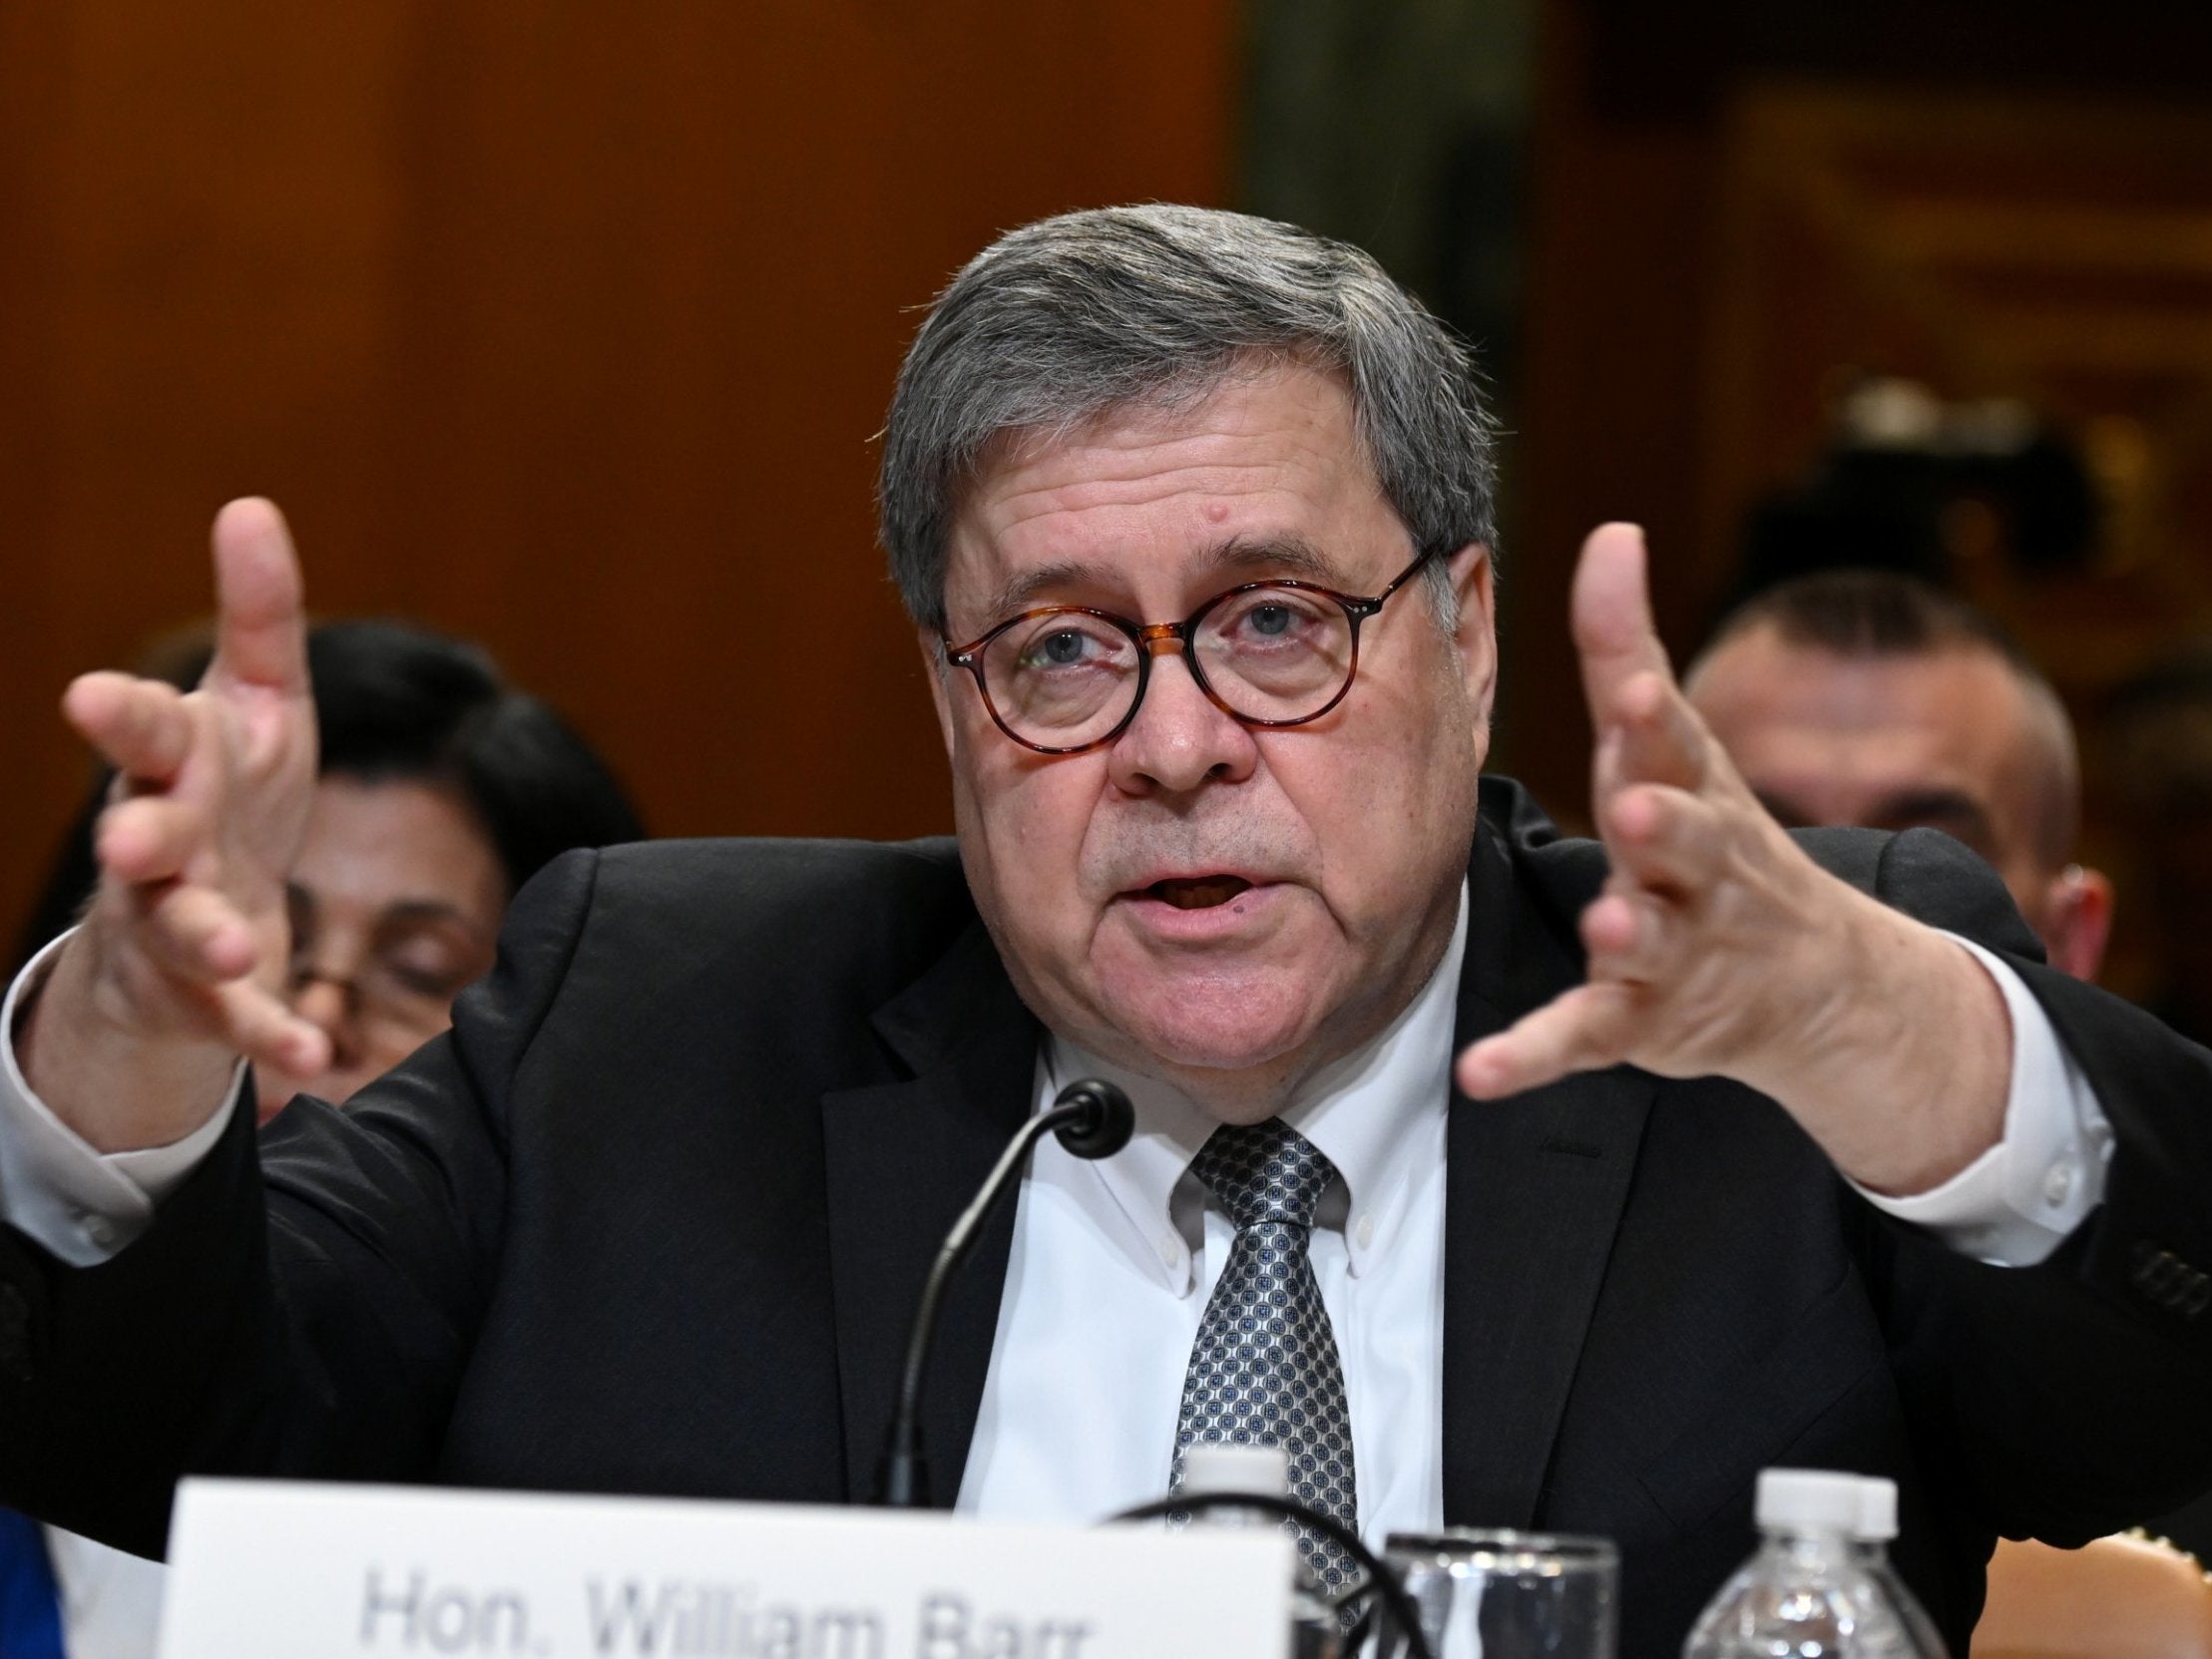 US intelligence agencies 'spied' on Trump 2016 campaign, says William Barr